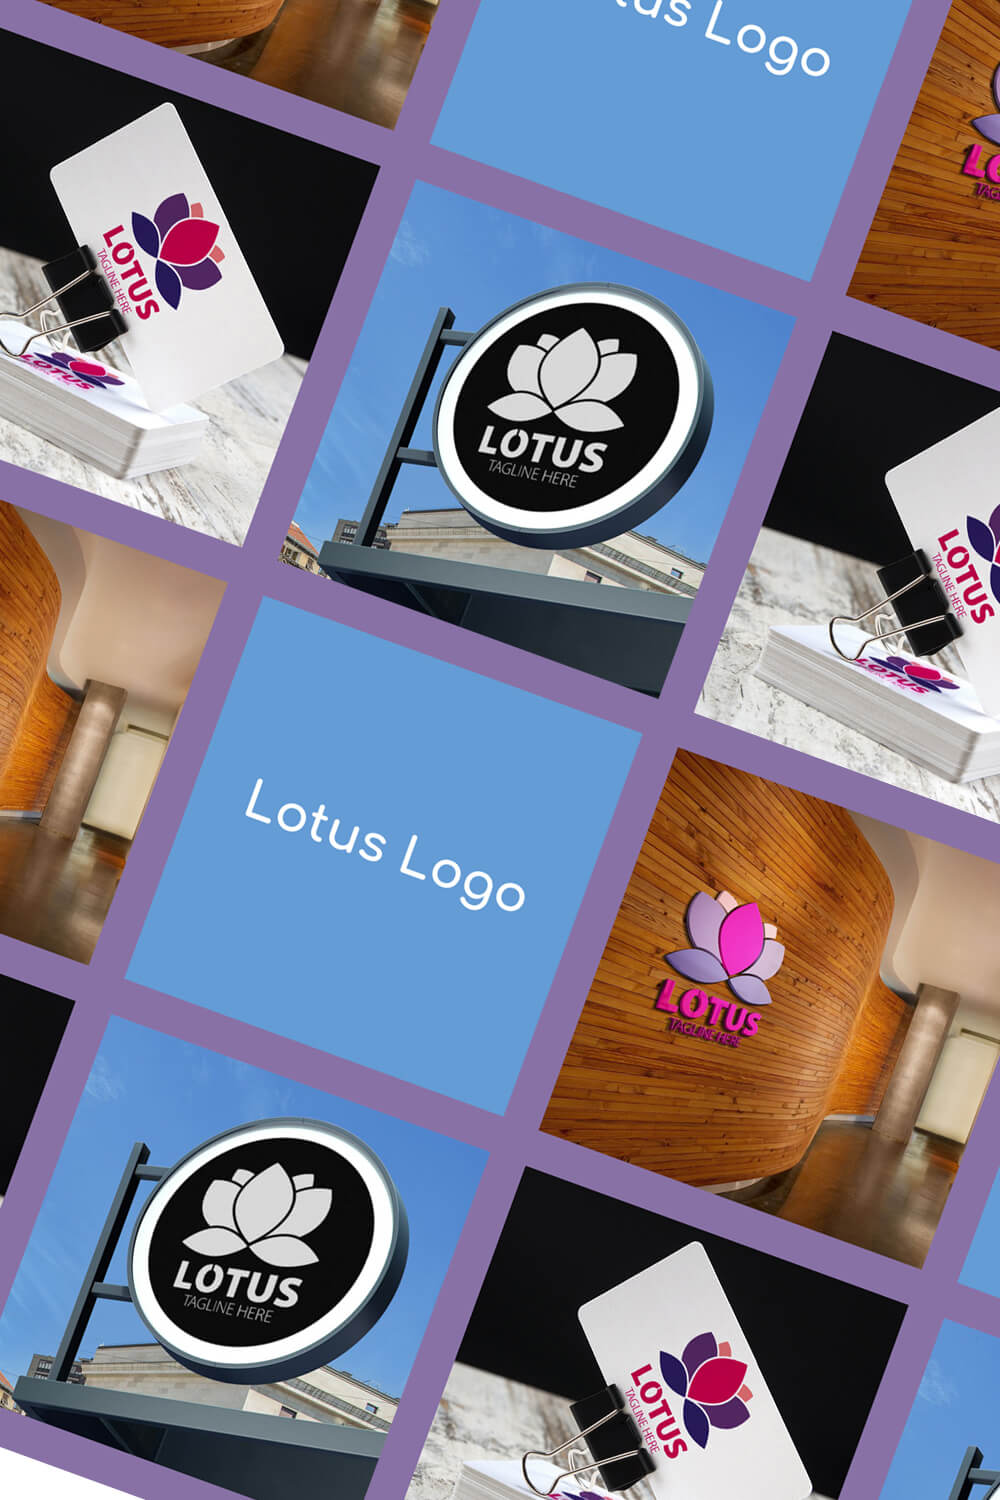 Twelve pictures with logos and inscriptions Lotus Tagline Here on a purple background placed at an angle.